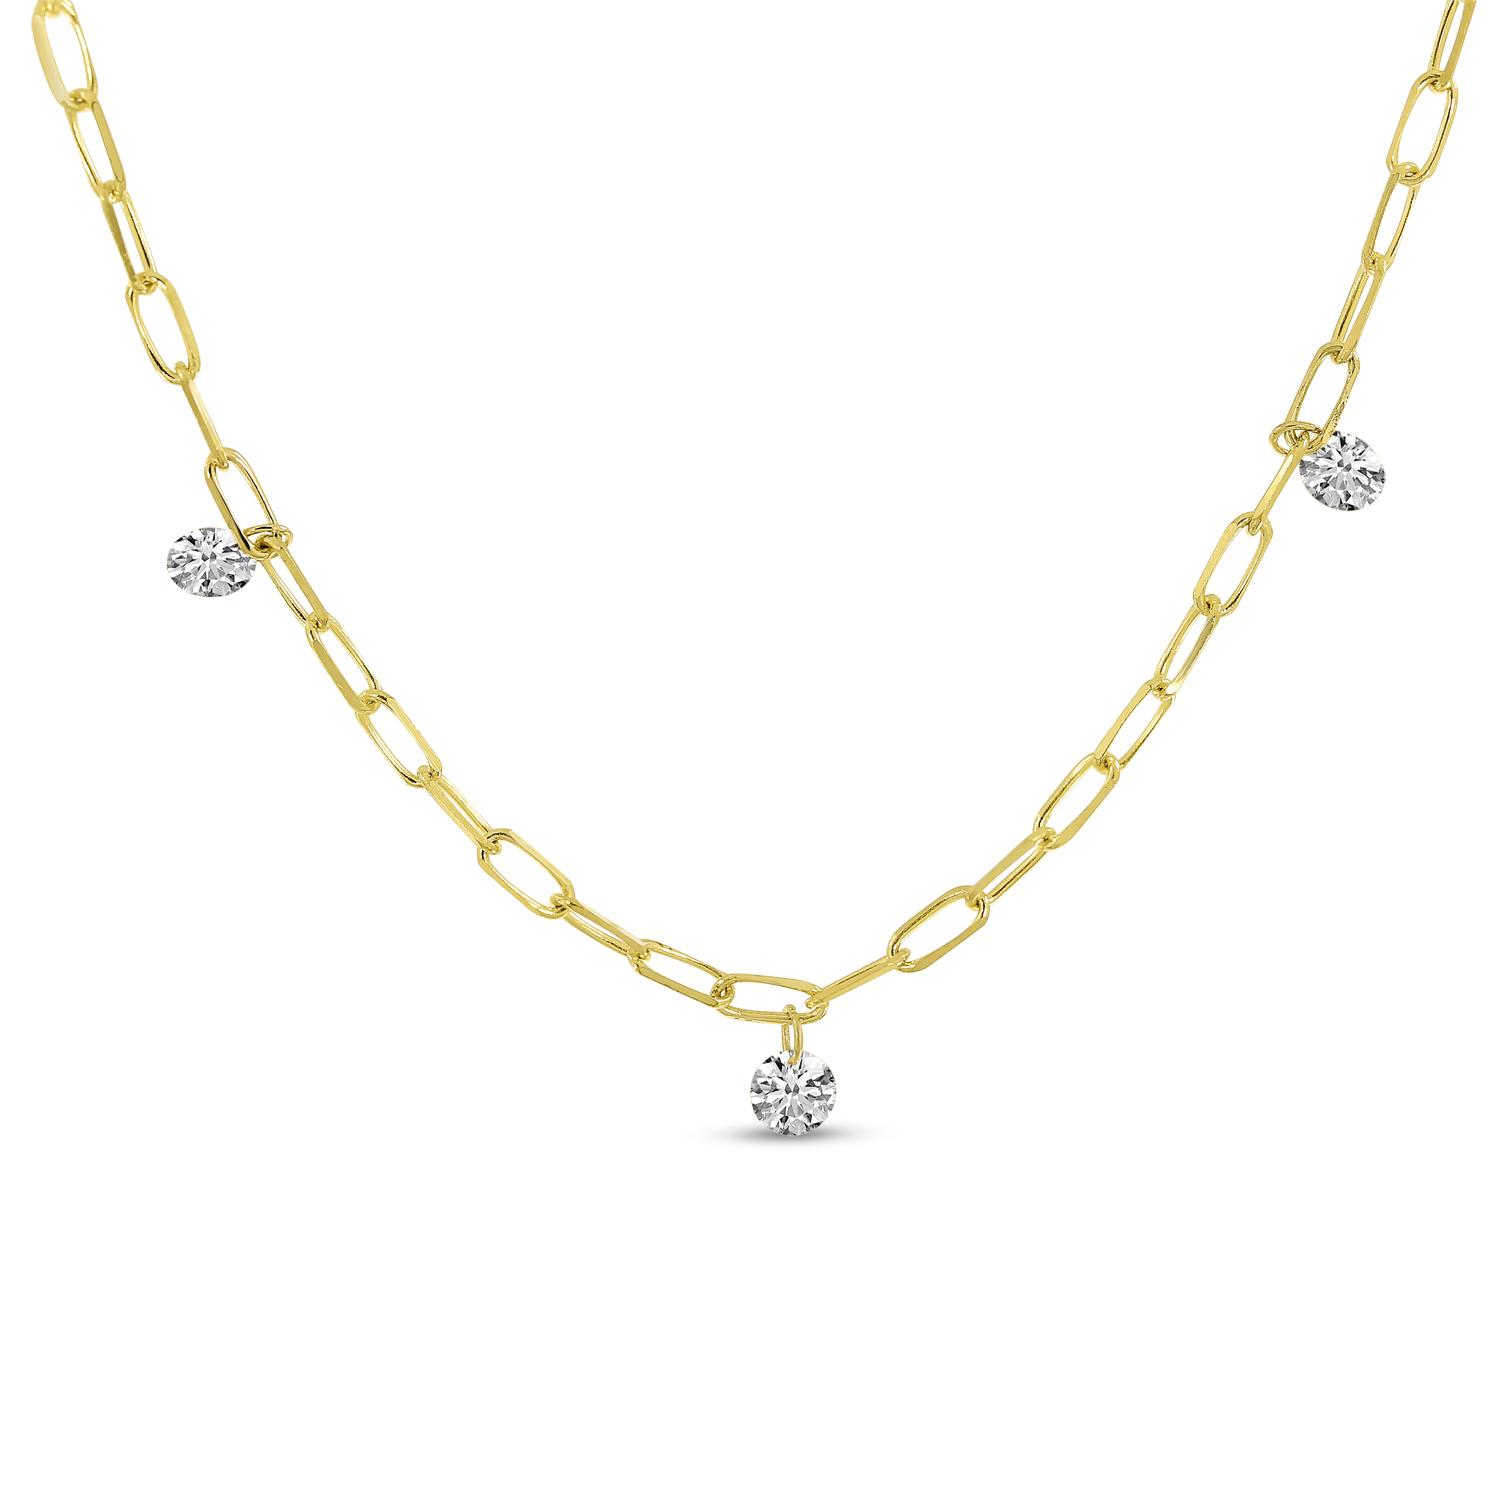 14K Yellow Gold 0.24 Ct Dashing Diamond 18 inch Link Necklace